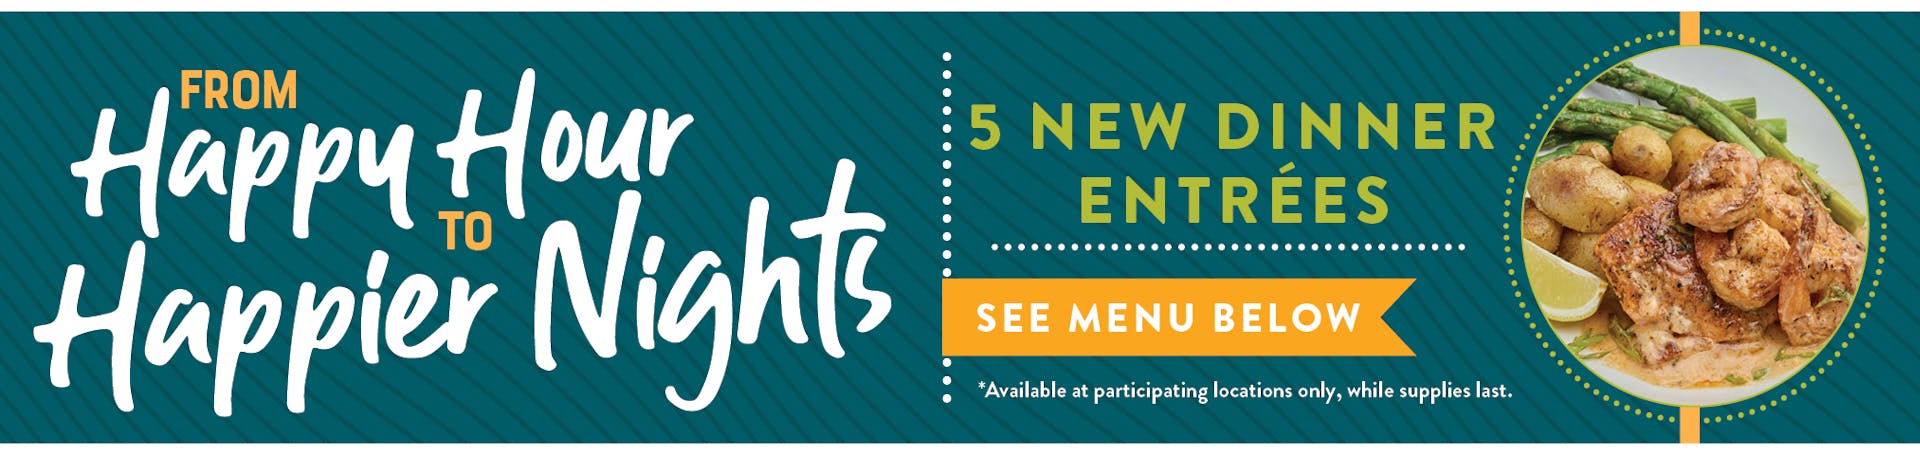 Image of Savory Selection new dinner plate. From Happy Hour to Happier Nights. 5 NEW Dinner Entrees, see menu below. Available at participating locations and while supplies last.